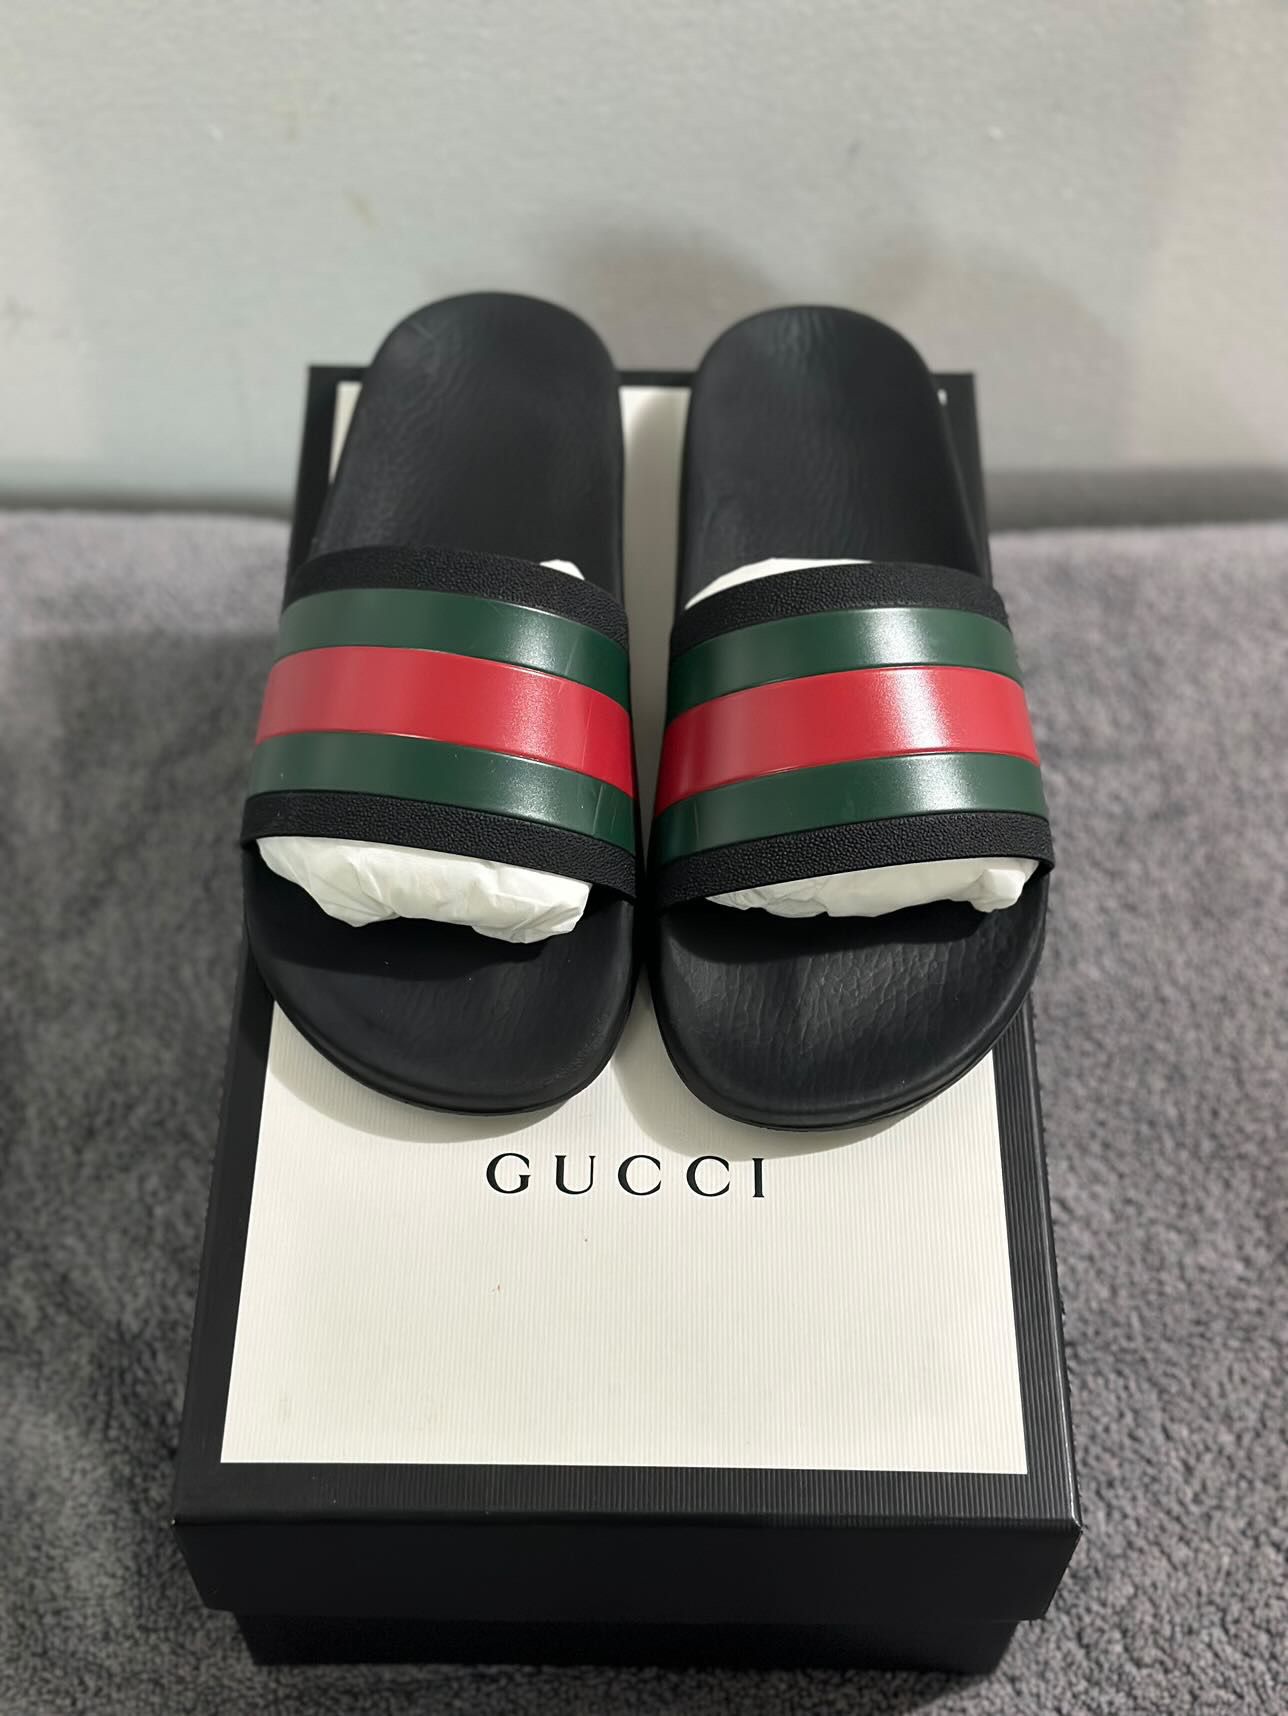 Gucci Slides for Sale in Bronx, NY - OfferUp